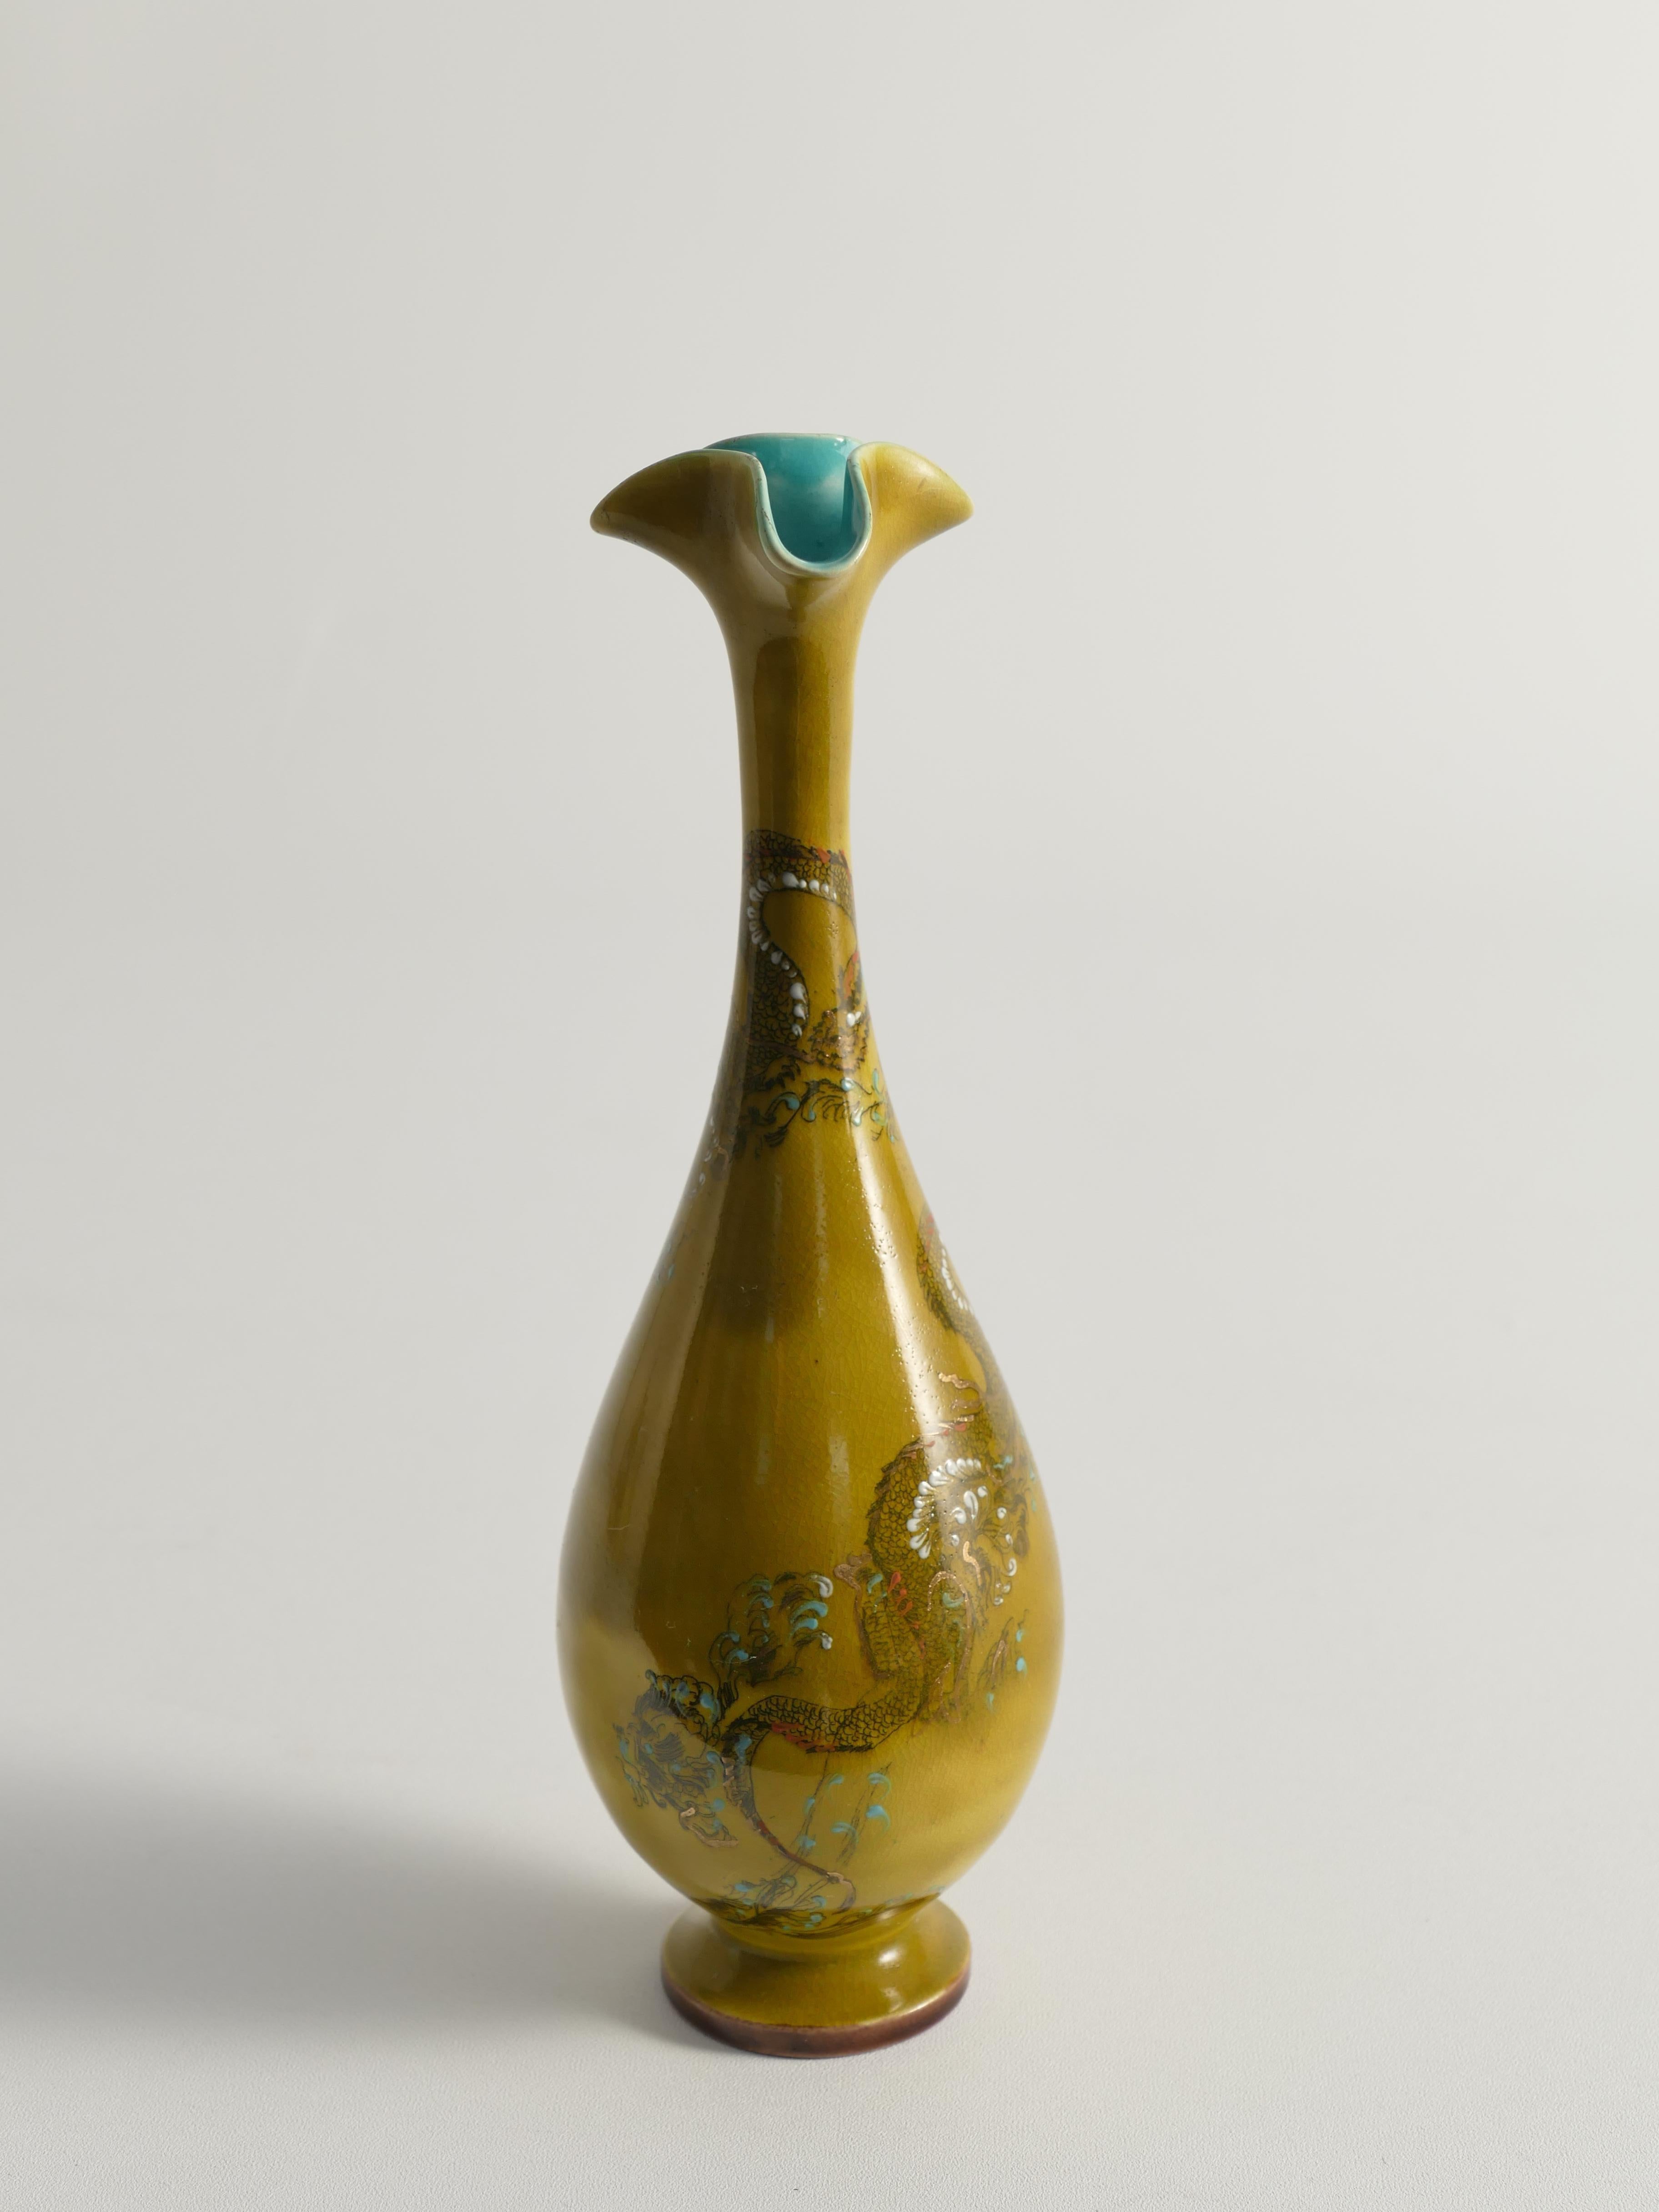 Aesthetic Movement Chinoiserie Ochre Yellow Dragon Vase by Lambeth Doulton Faience, England 1880s For Sale